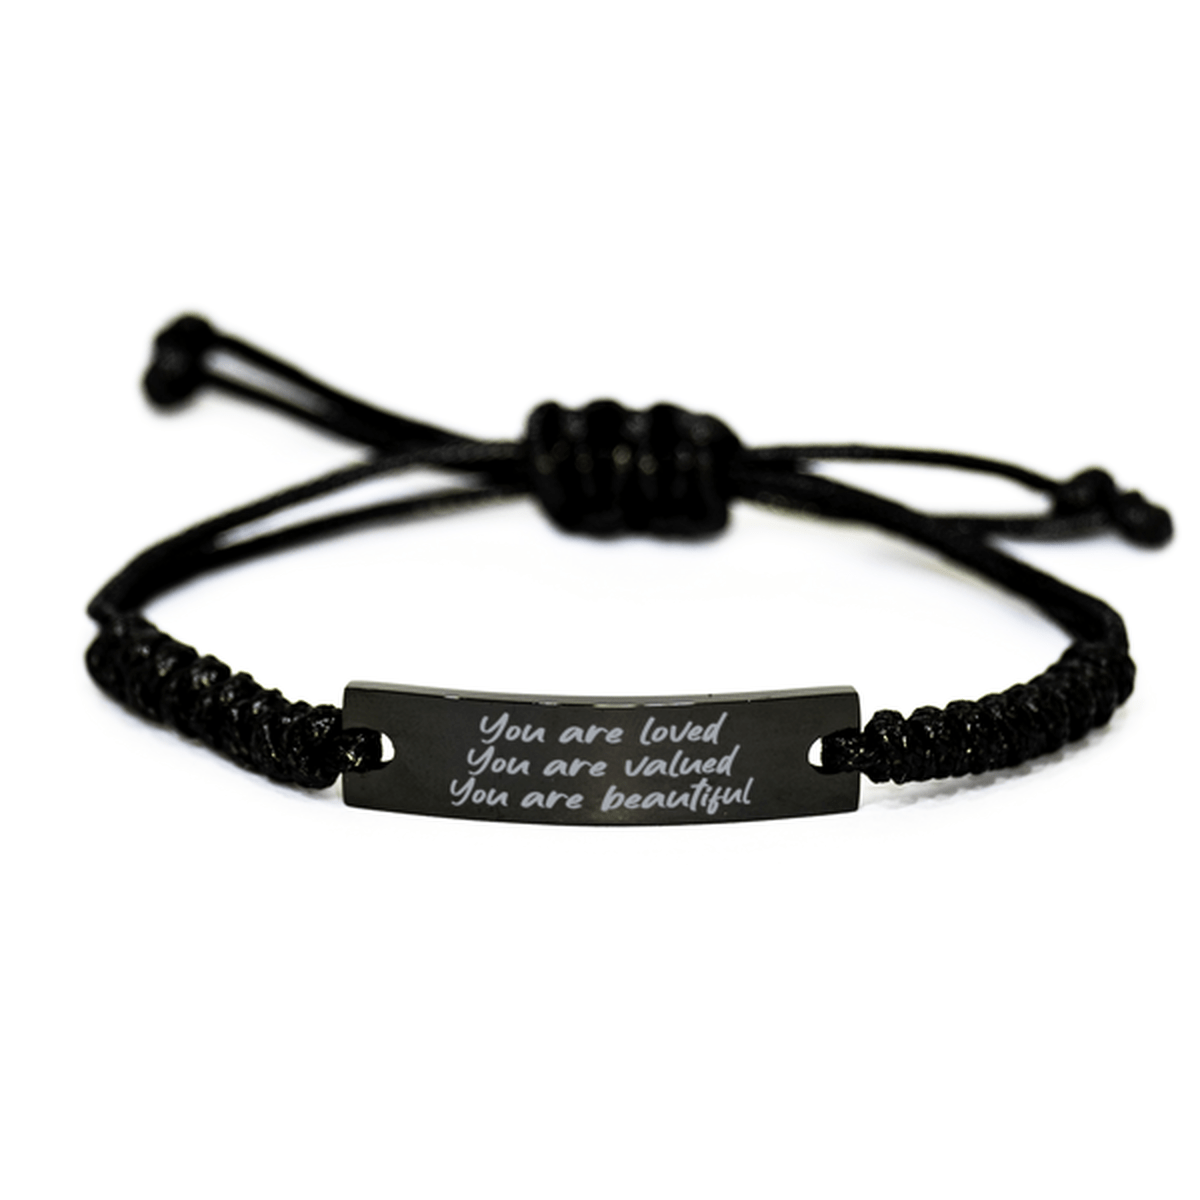 You Are Loved - You Are Valued - You Are Beautiful - Black Rope Bracelet for Motivation - Jewelry Gift for Teen Girl